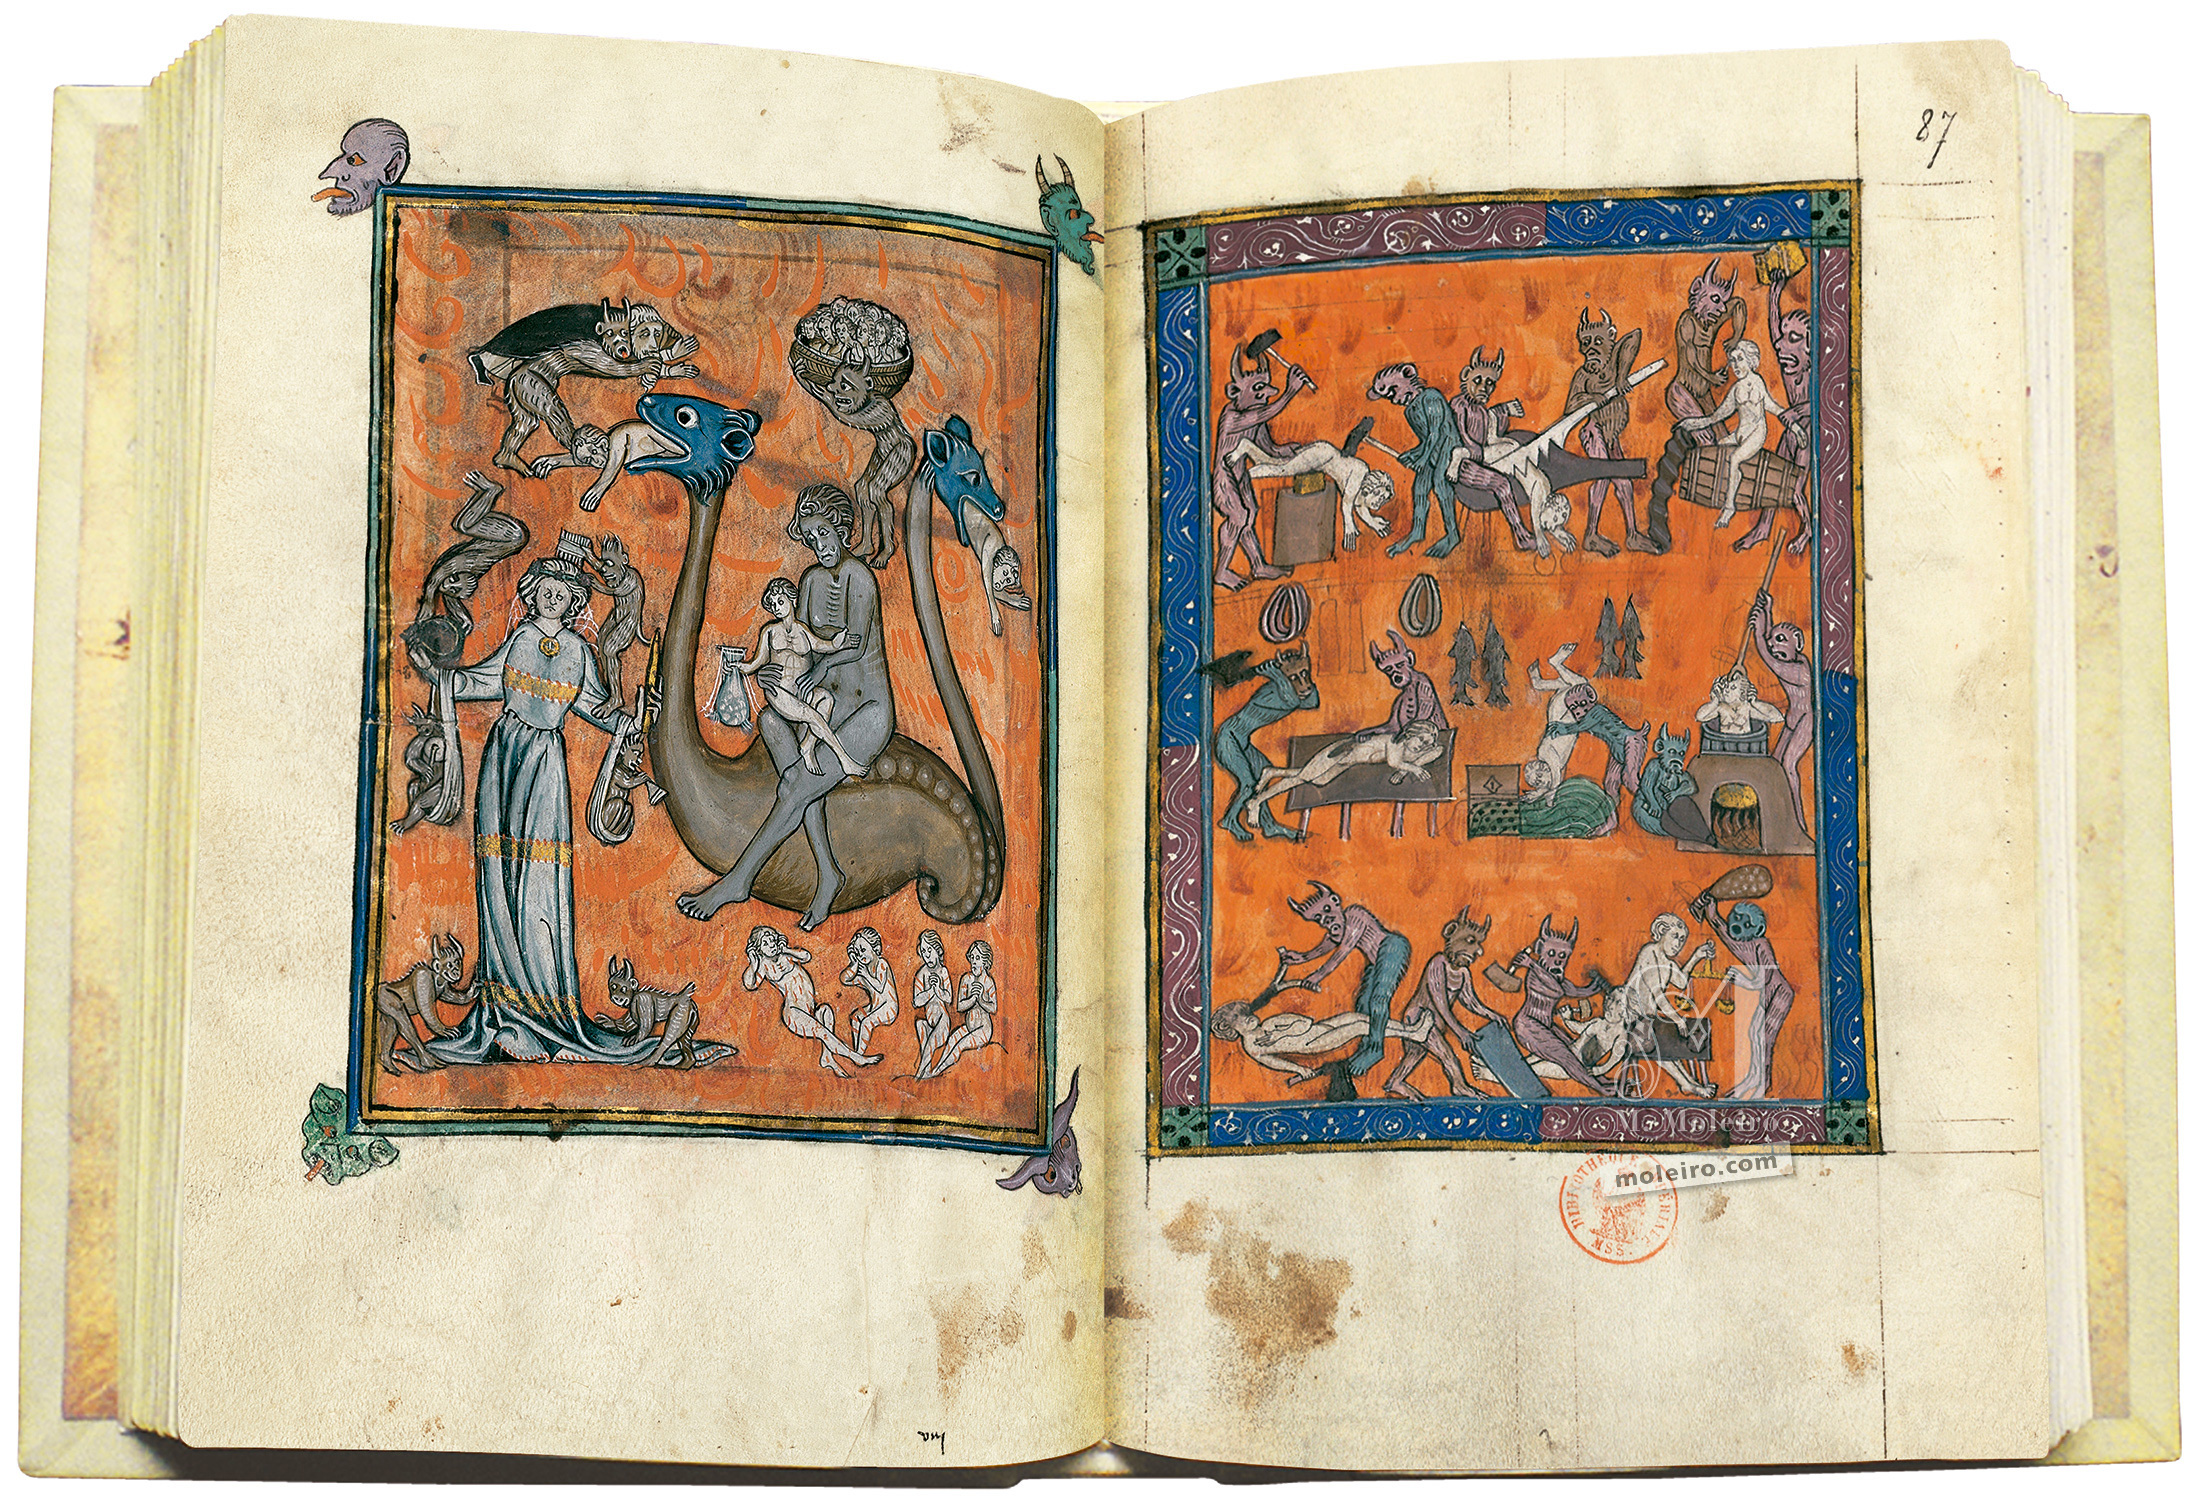 APOCALYPSE OF 1313, ff. 86v-87r: The Great Harlot in Hell and the Hell of Trades